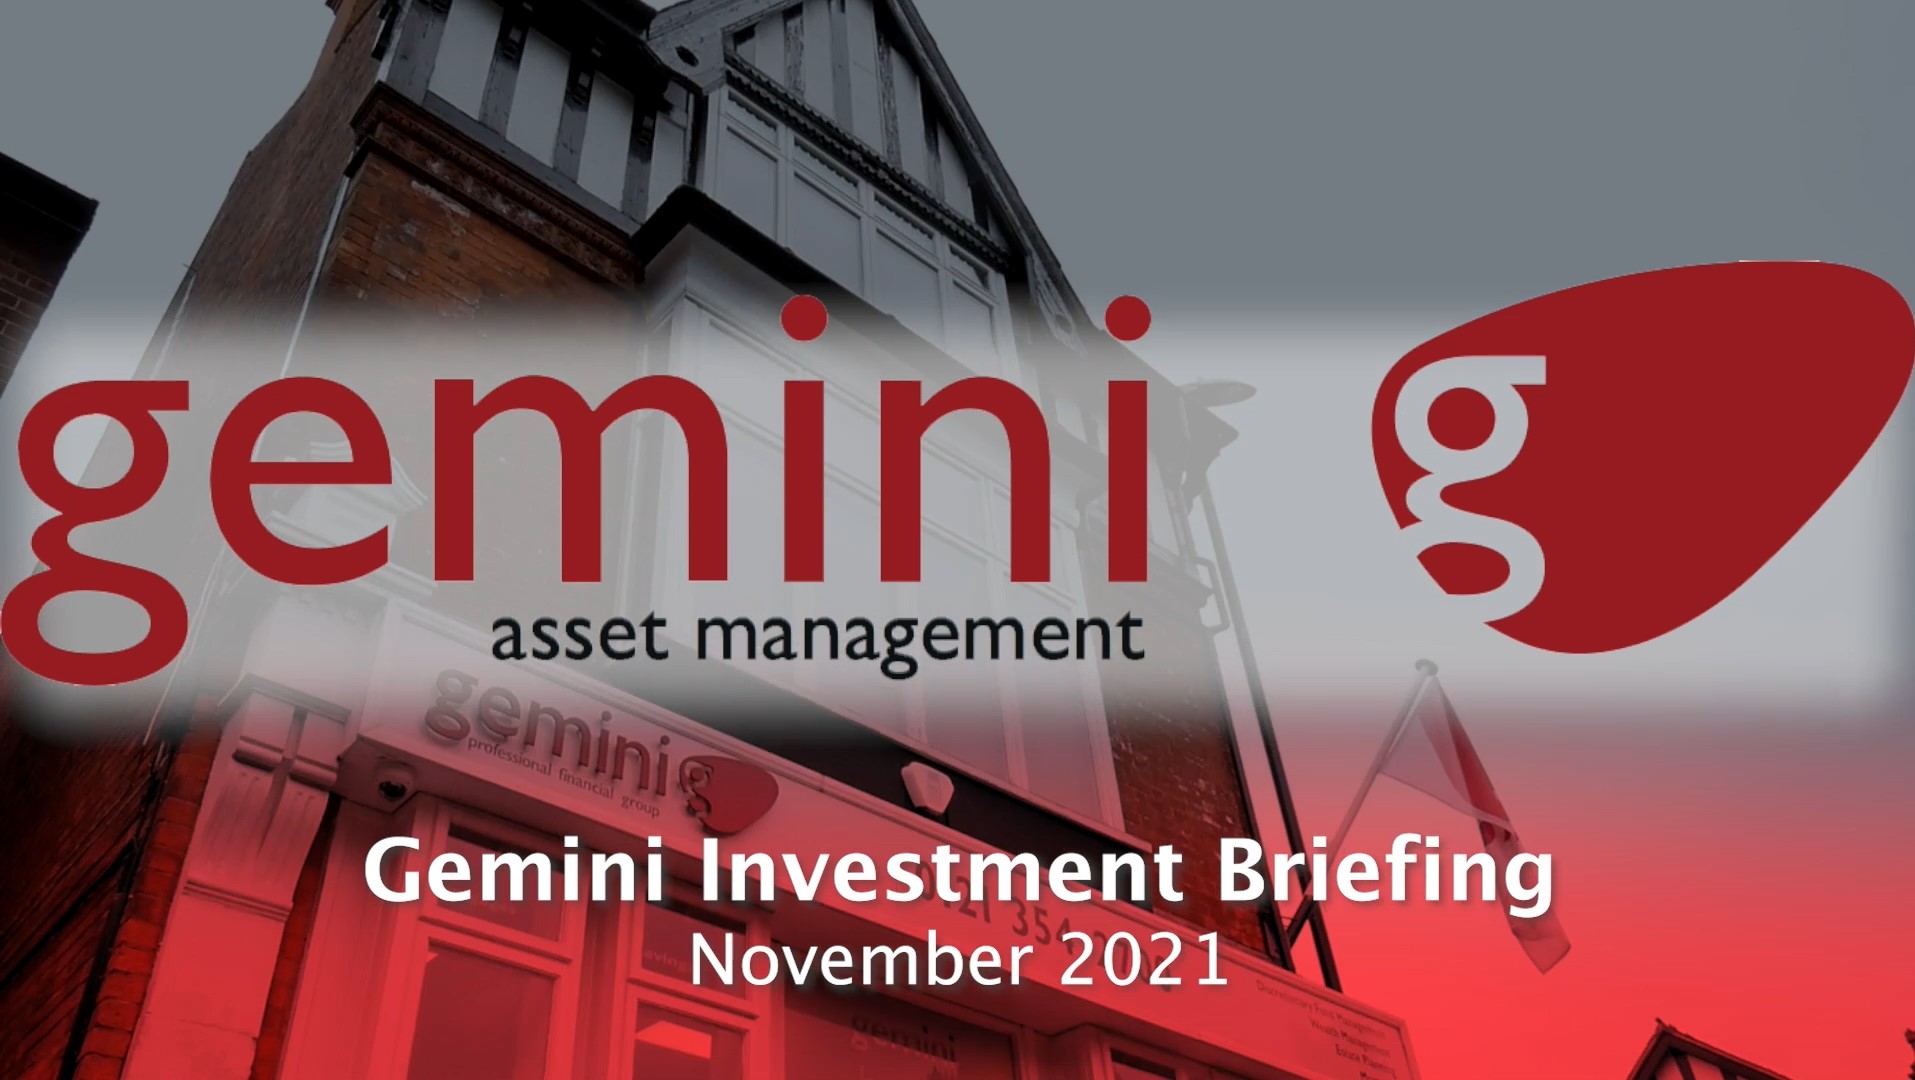 Investment Briefing November 2021